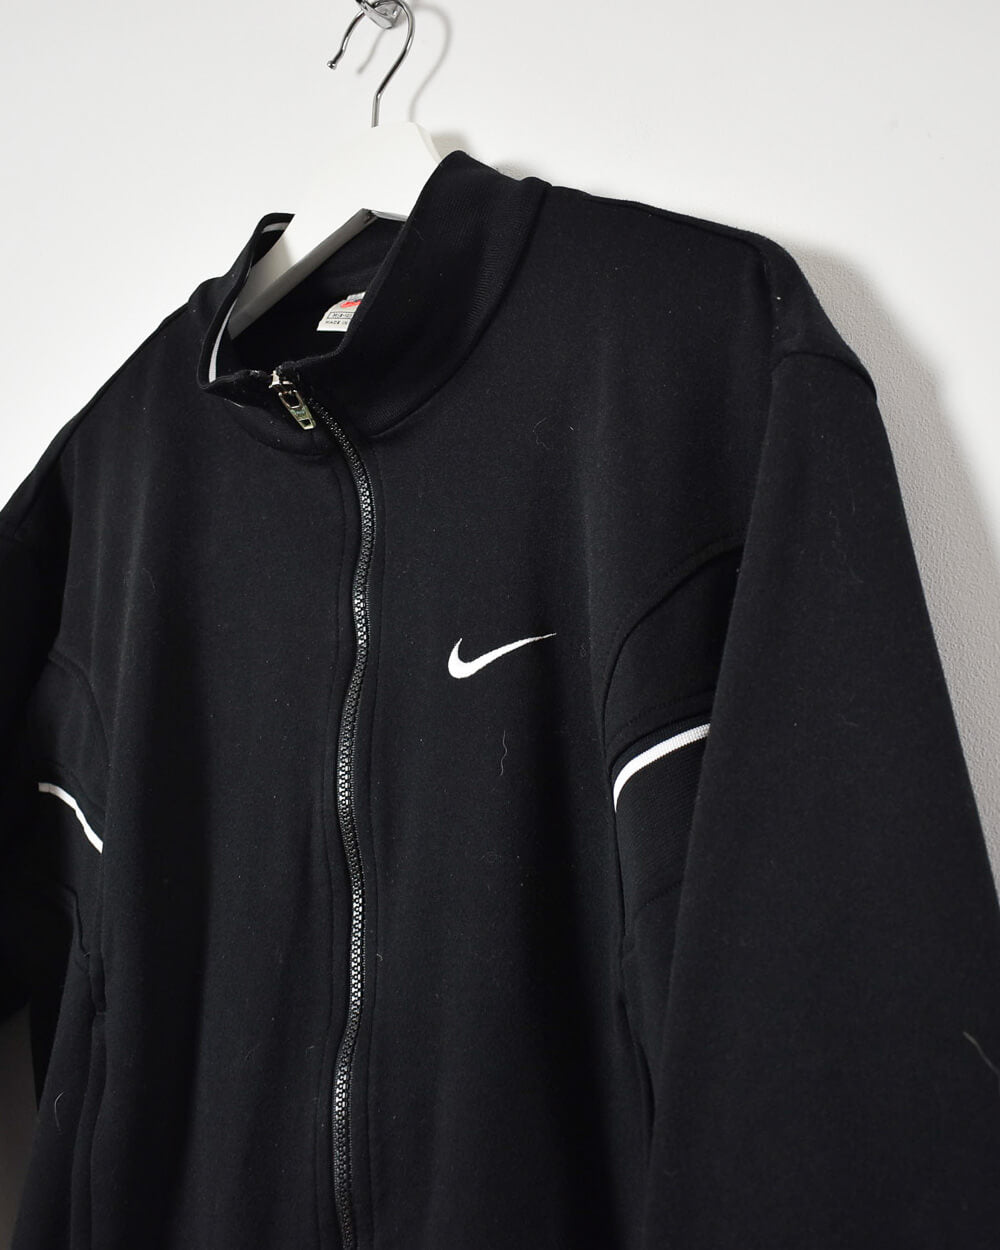 Nike Women's Tracksuit Top - Medium - Domno Vintage 90s, 80s, 00s Retro and Vintage Clothing 